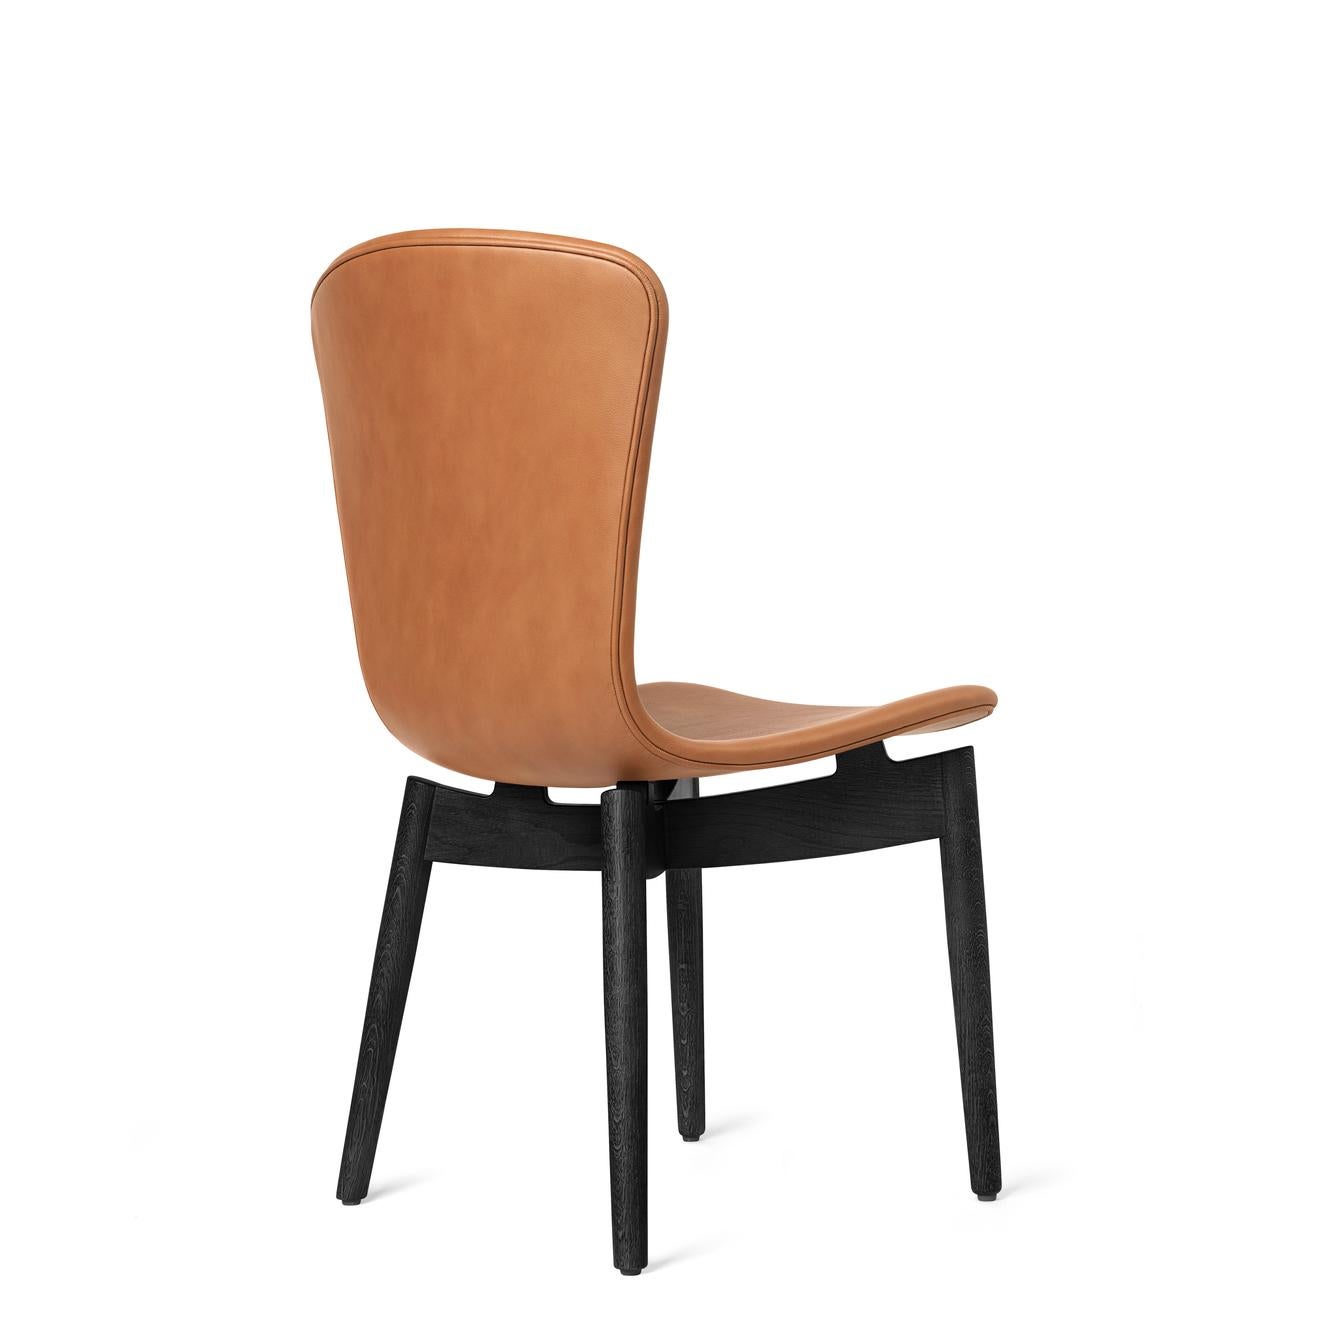 The Mater shell dining chair is now introduced with a new and softer leather upholstery version of the Mater shell chair designed by Michael Dreeben. The collaboration with the most recognized Danish leather supplier, Sorensen Leathers, is bringing